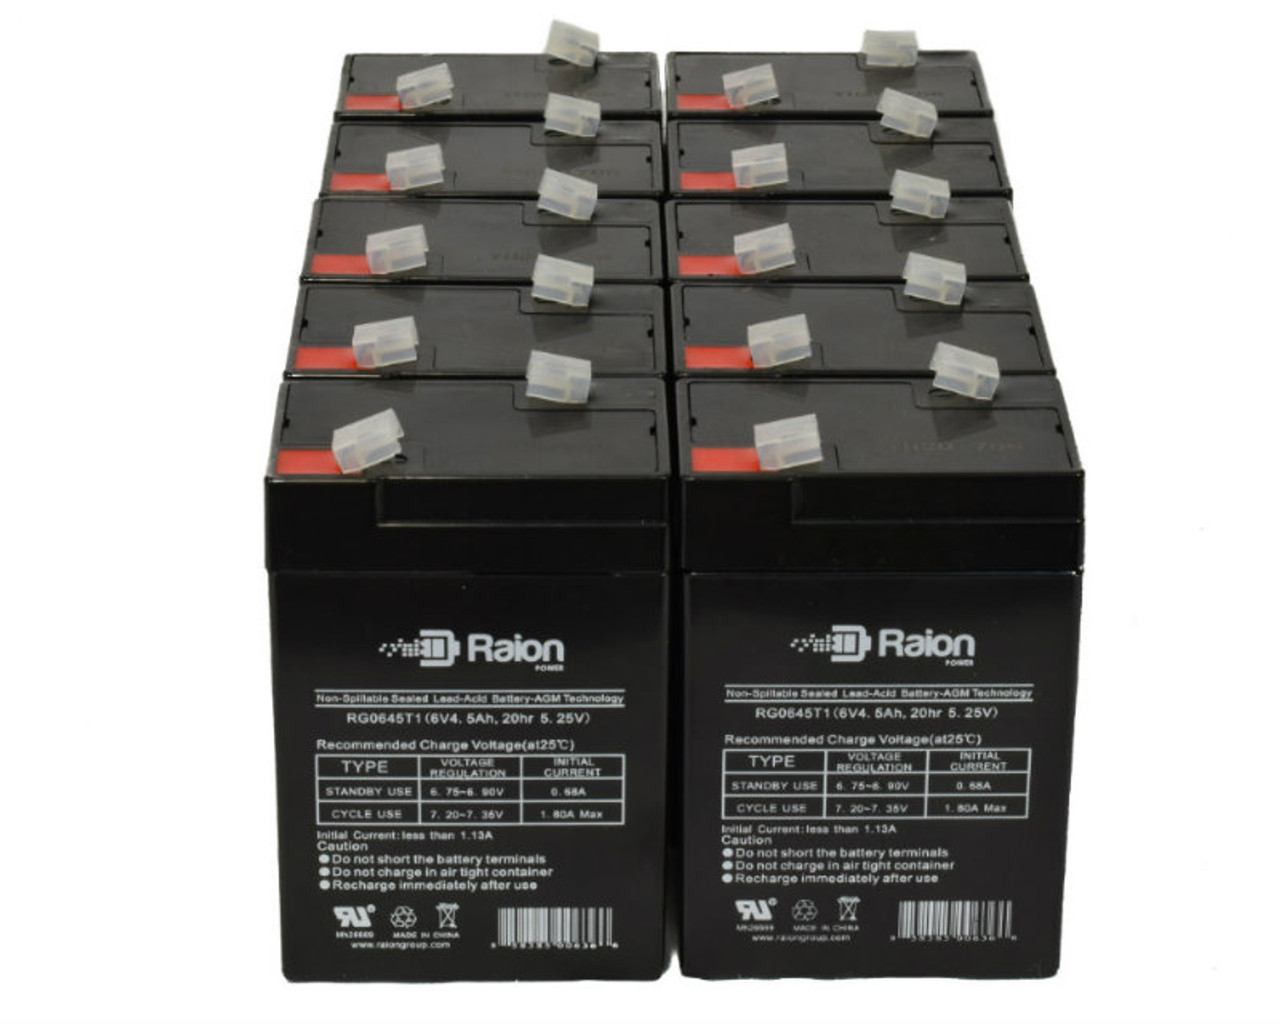 Raion Power 6 Volt 4.5Ah RG0645T1 Replacement Battery for Blossom BT4-6 - 10 Pack